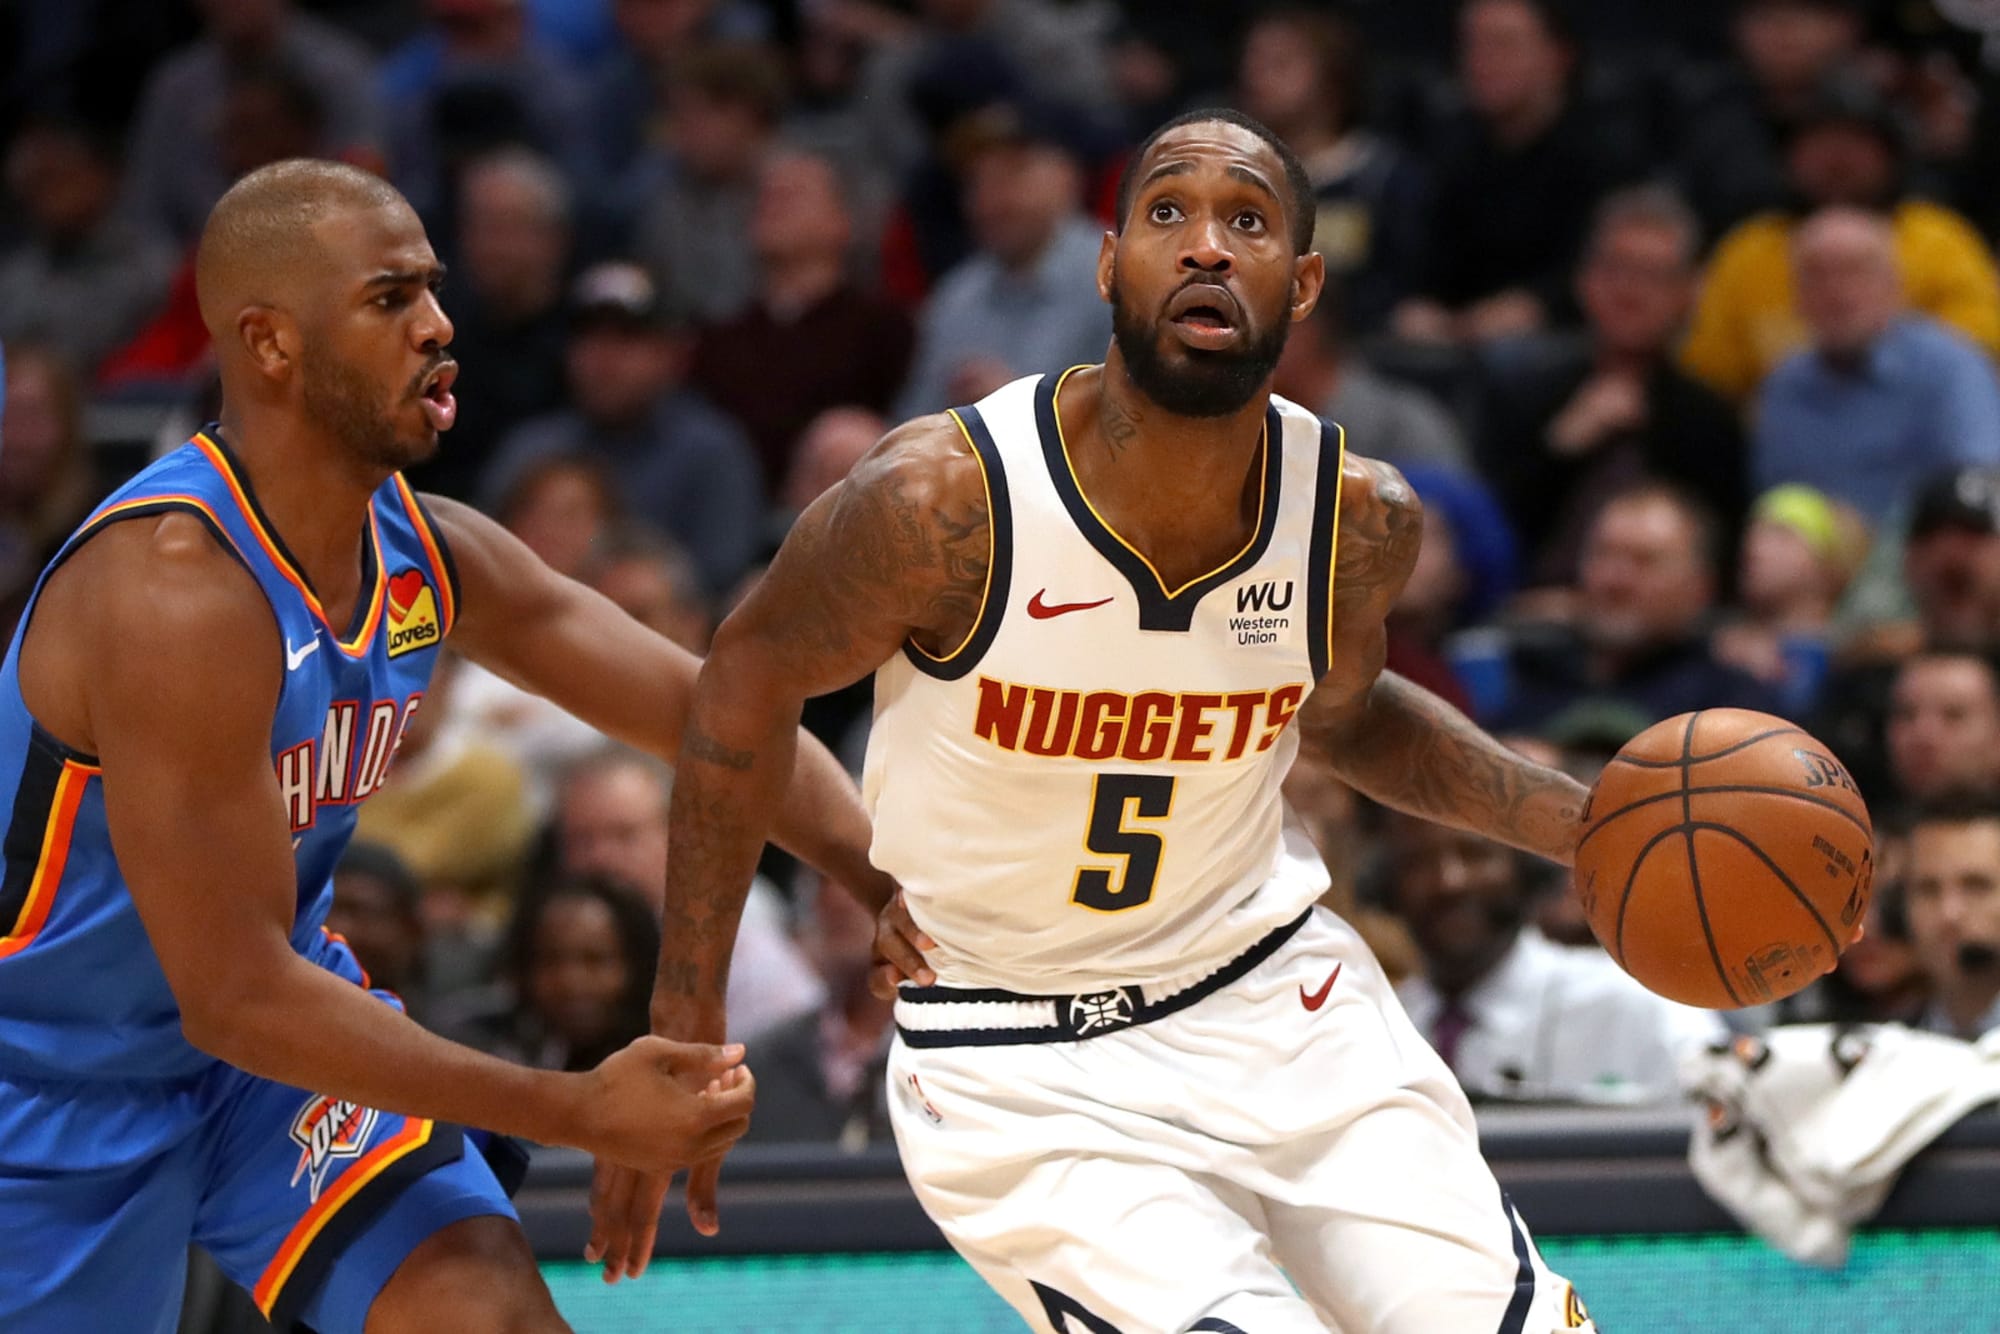 New York Knicks: 3 players to watch against Nuggets